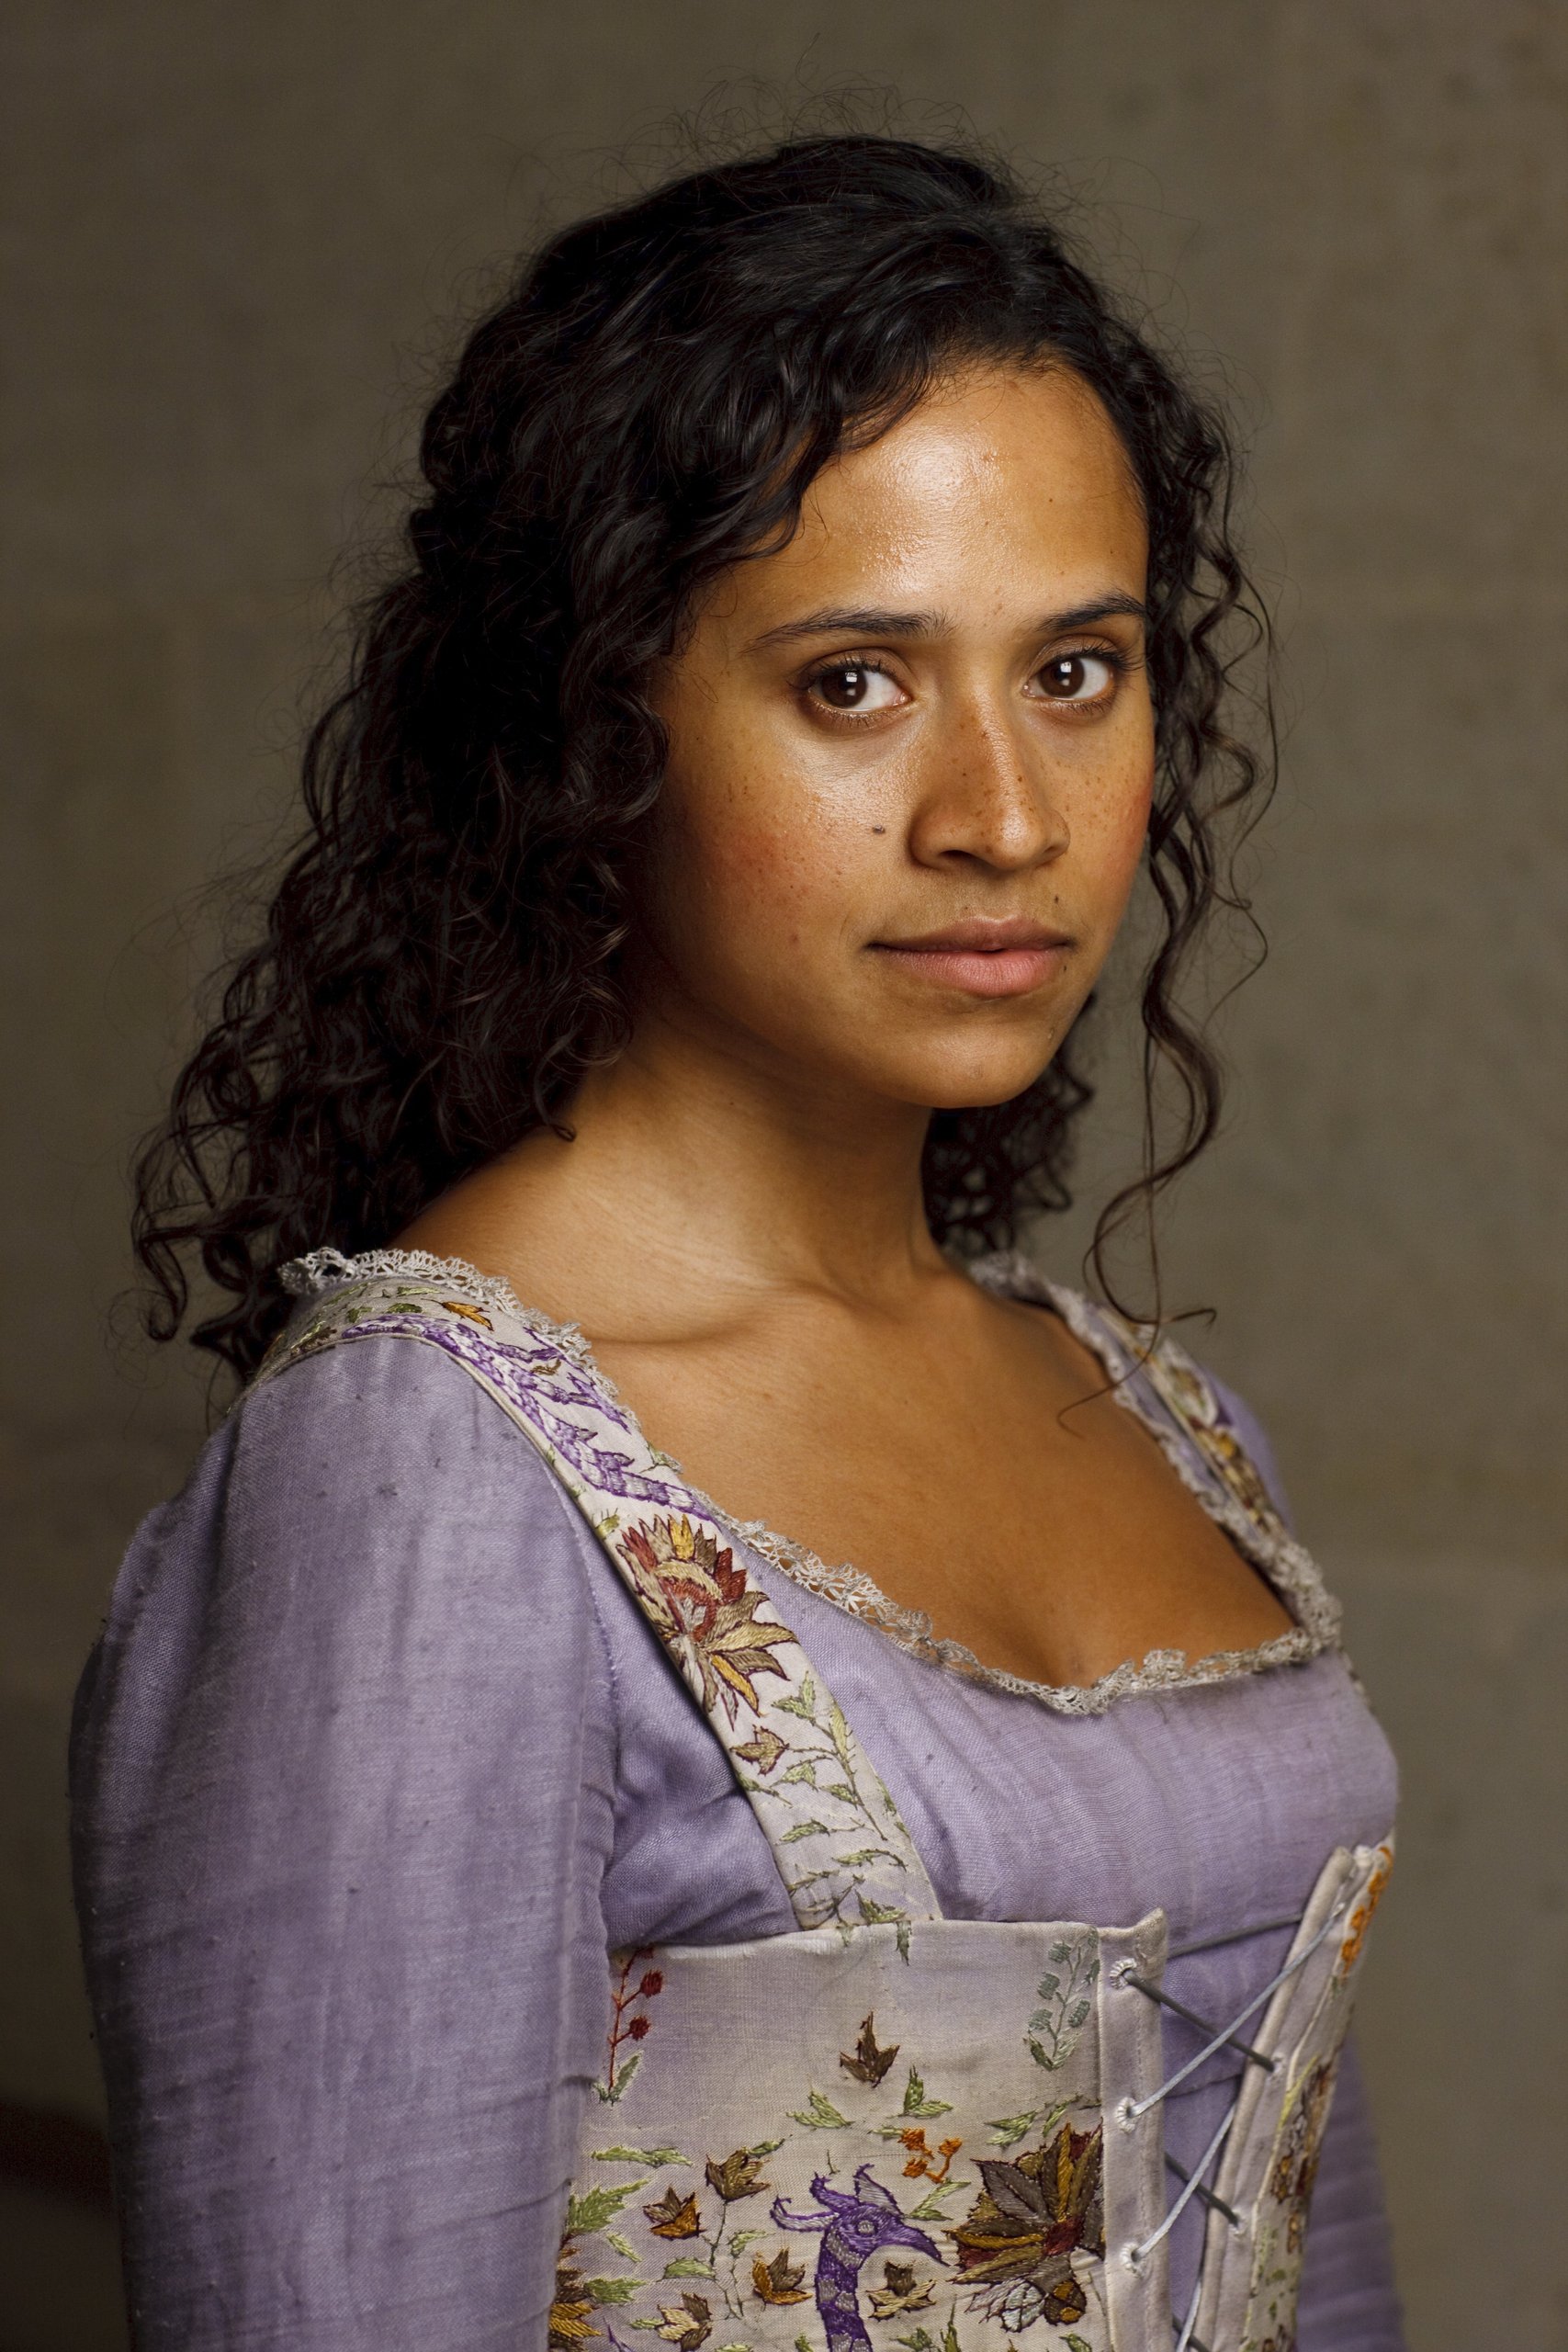 anna millington add angel coulby hot photo